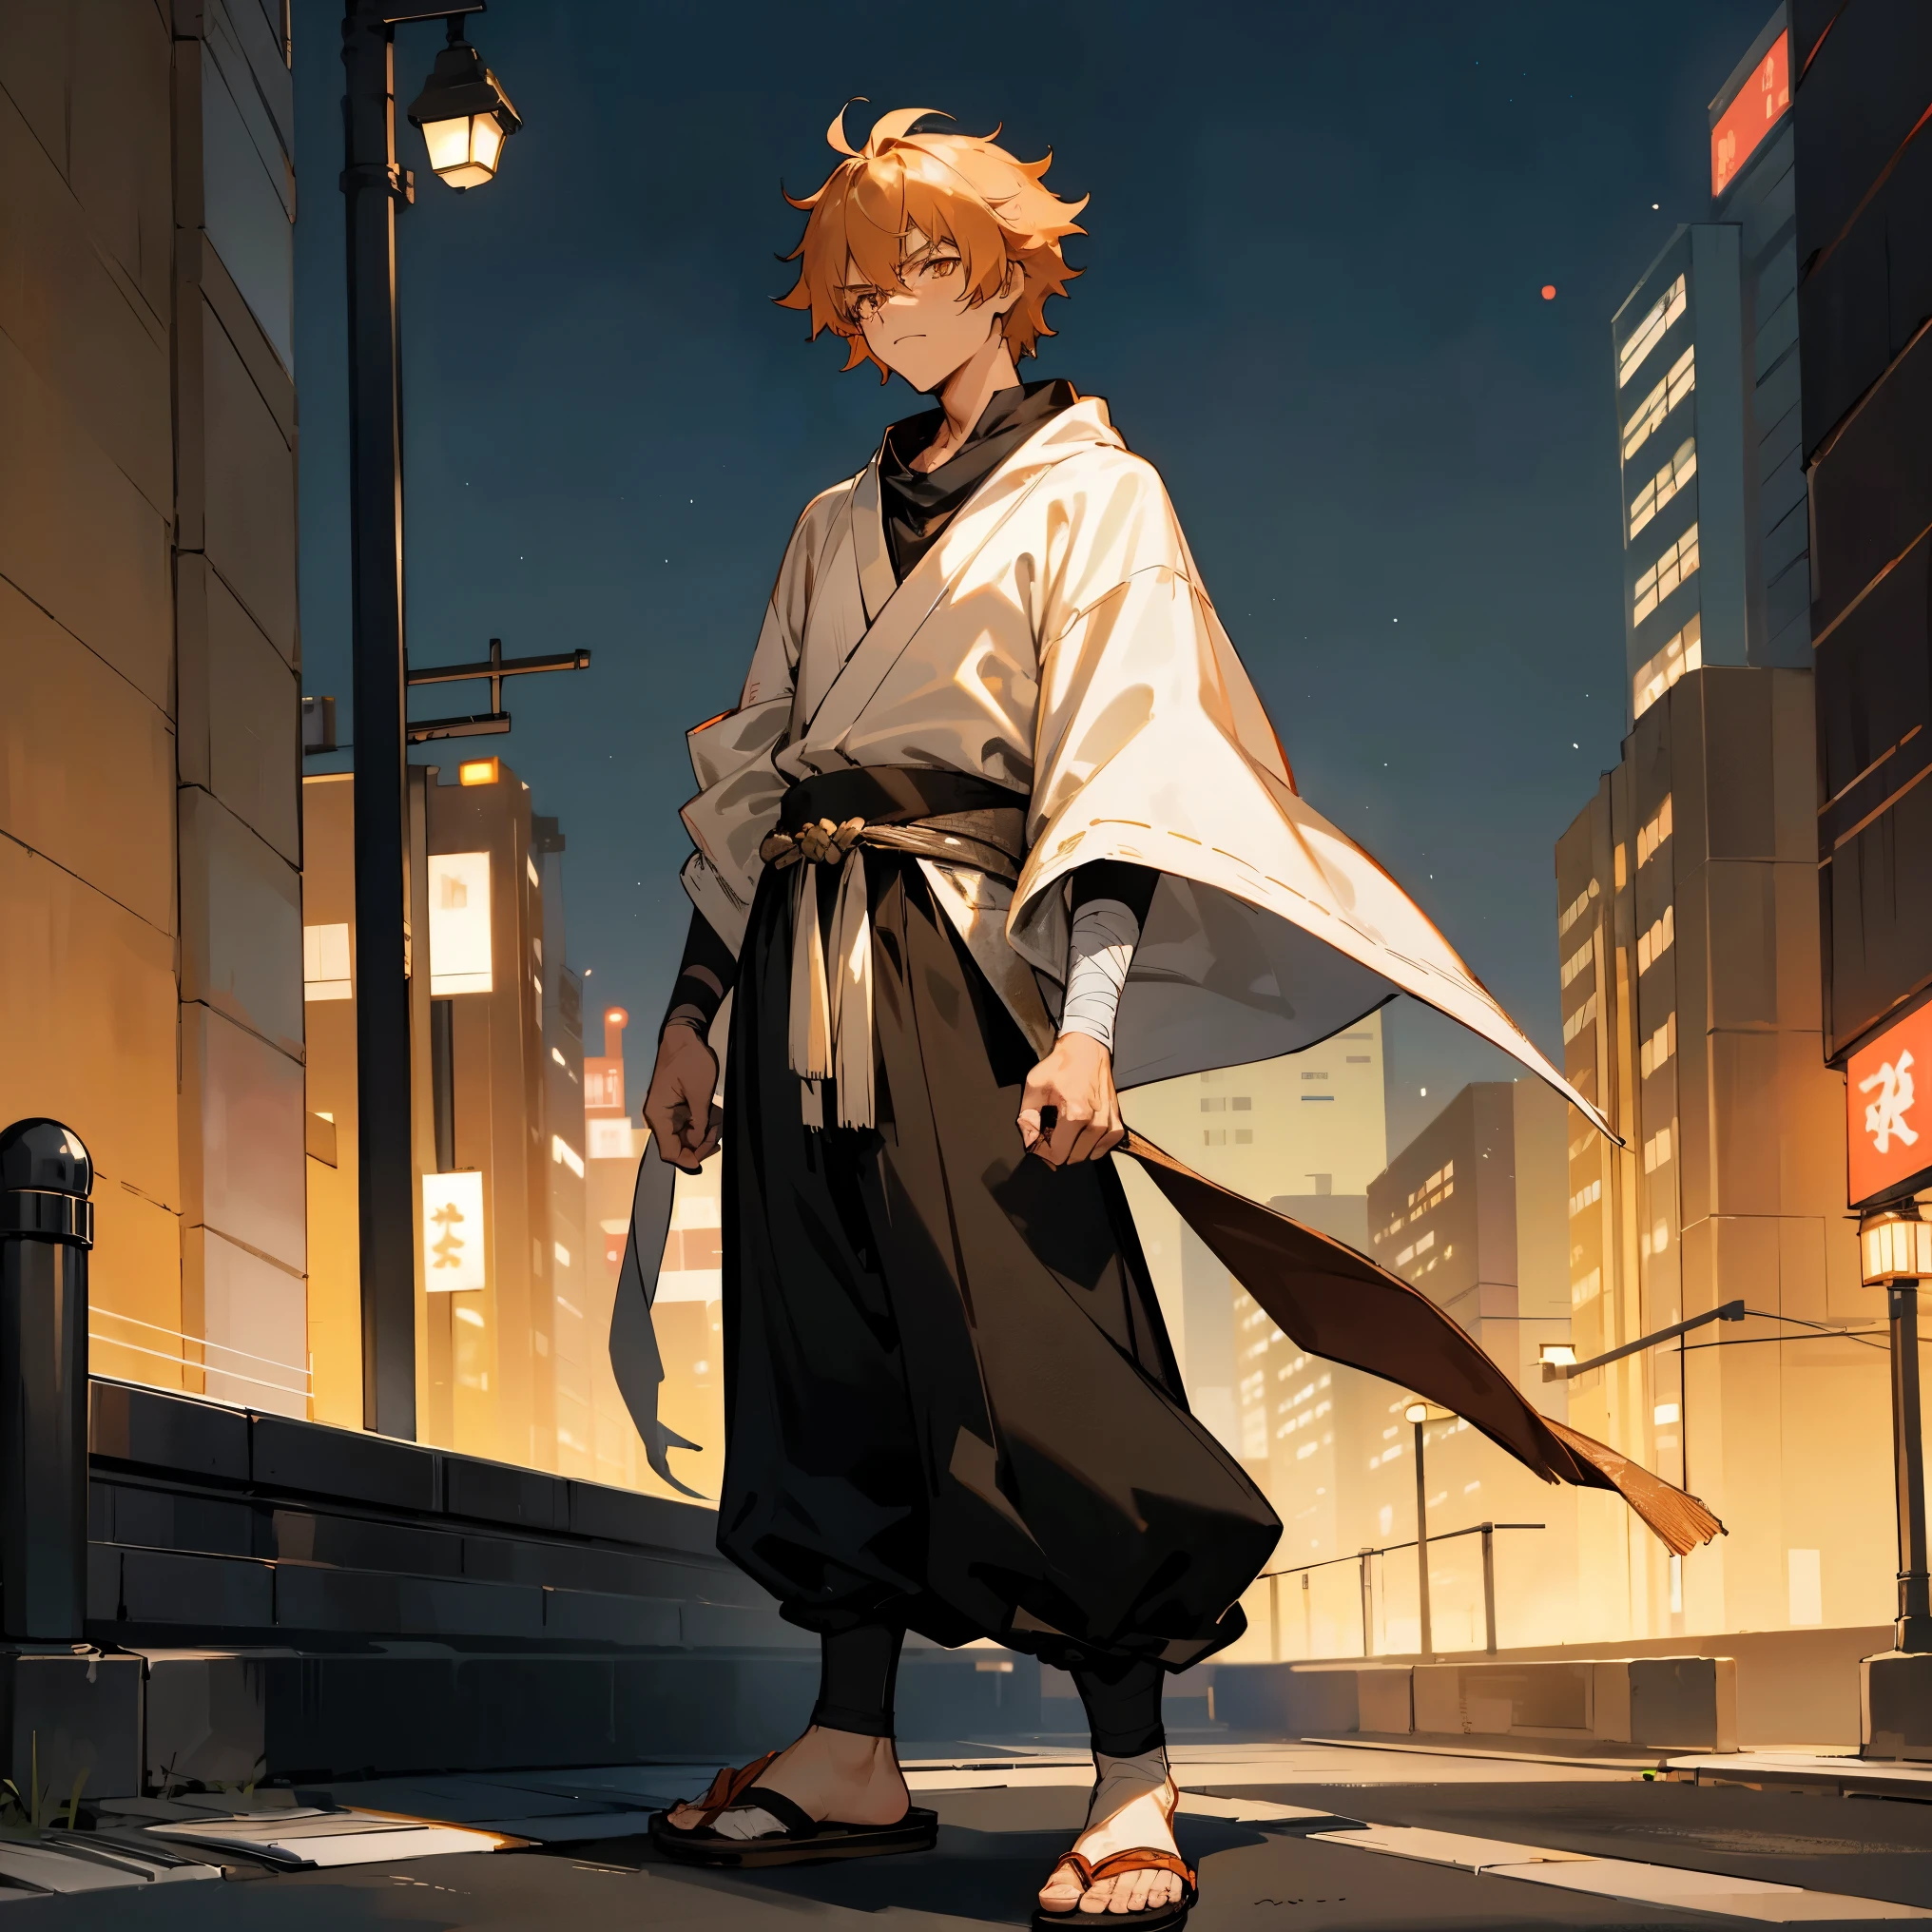 1male , Short Messy Hair , Peach Hair , Golden Eyes, Black one shoulder Yukata , Bandaged Arm , Tan Poncho , Tan Cowl , Baggy Black Pants , Japanese Sandals with socks , Facing Viewer , Modern City Background, Adult Male , Standing On Sidewalk , Adult Male , Serious Expression 